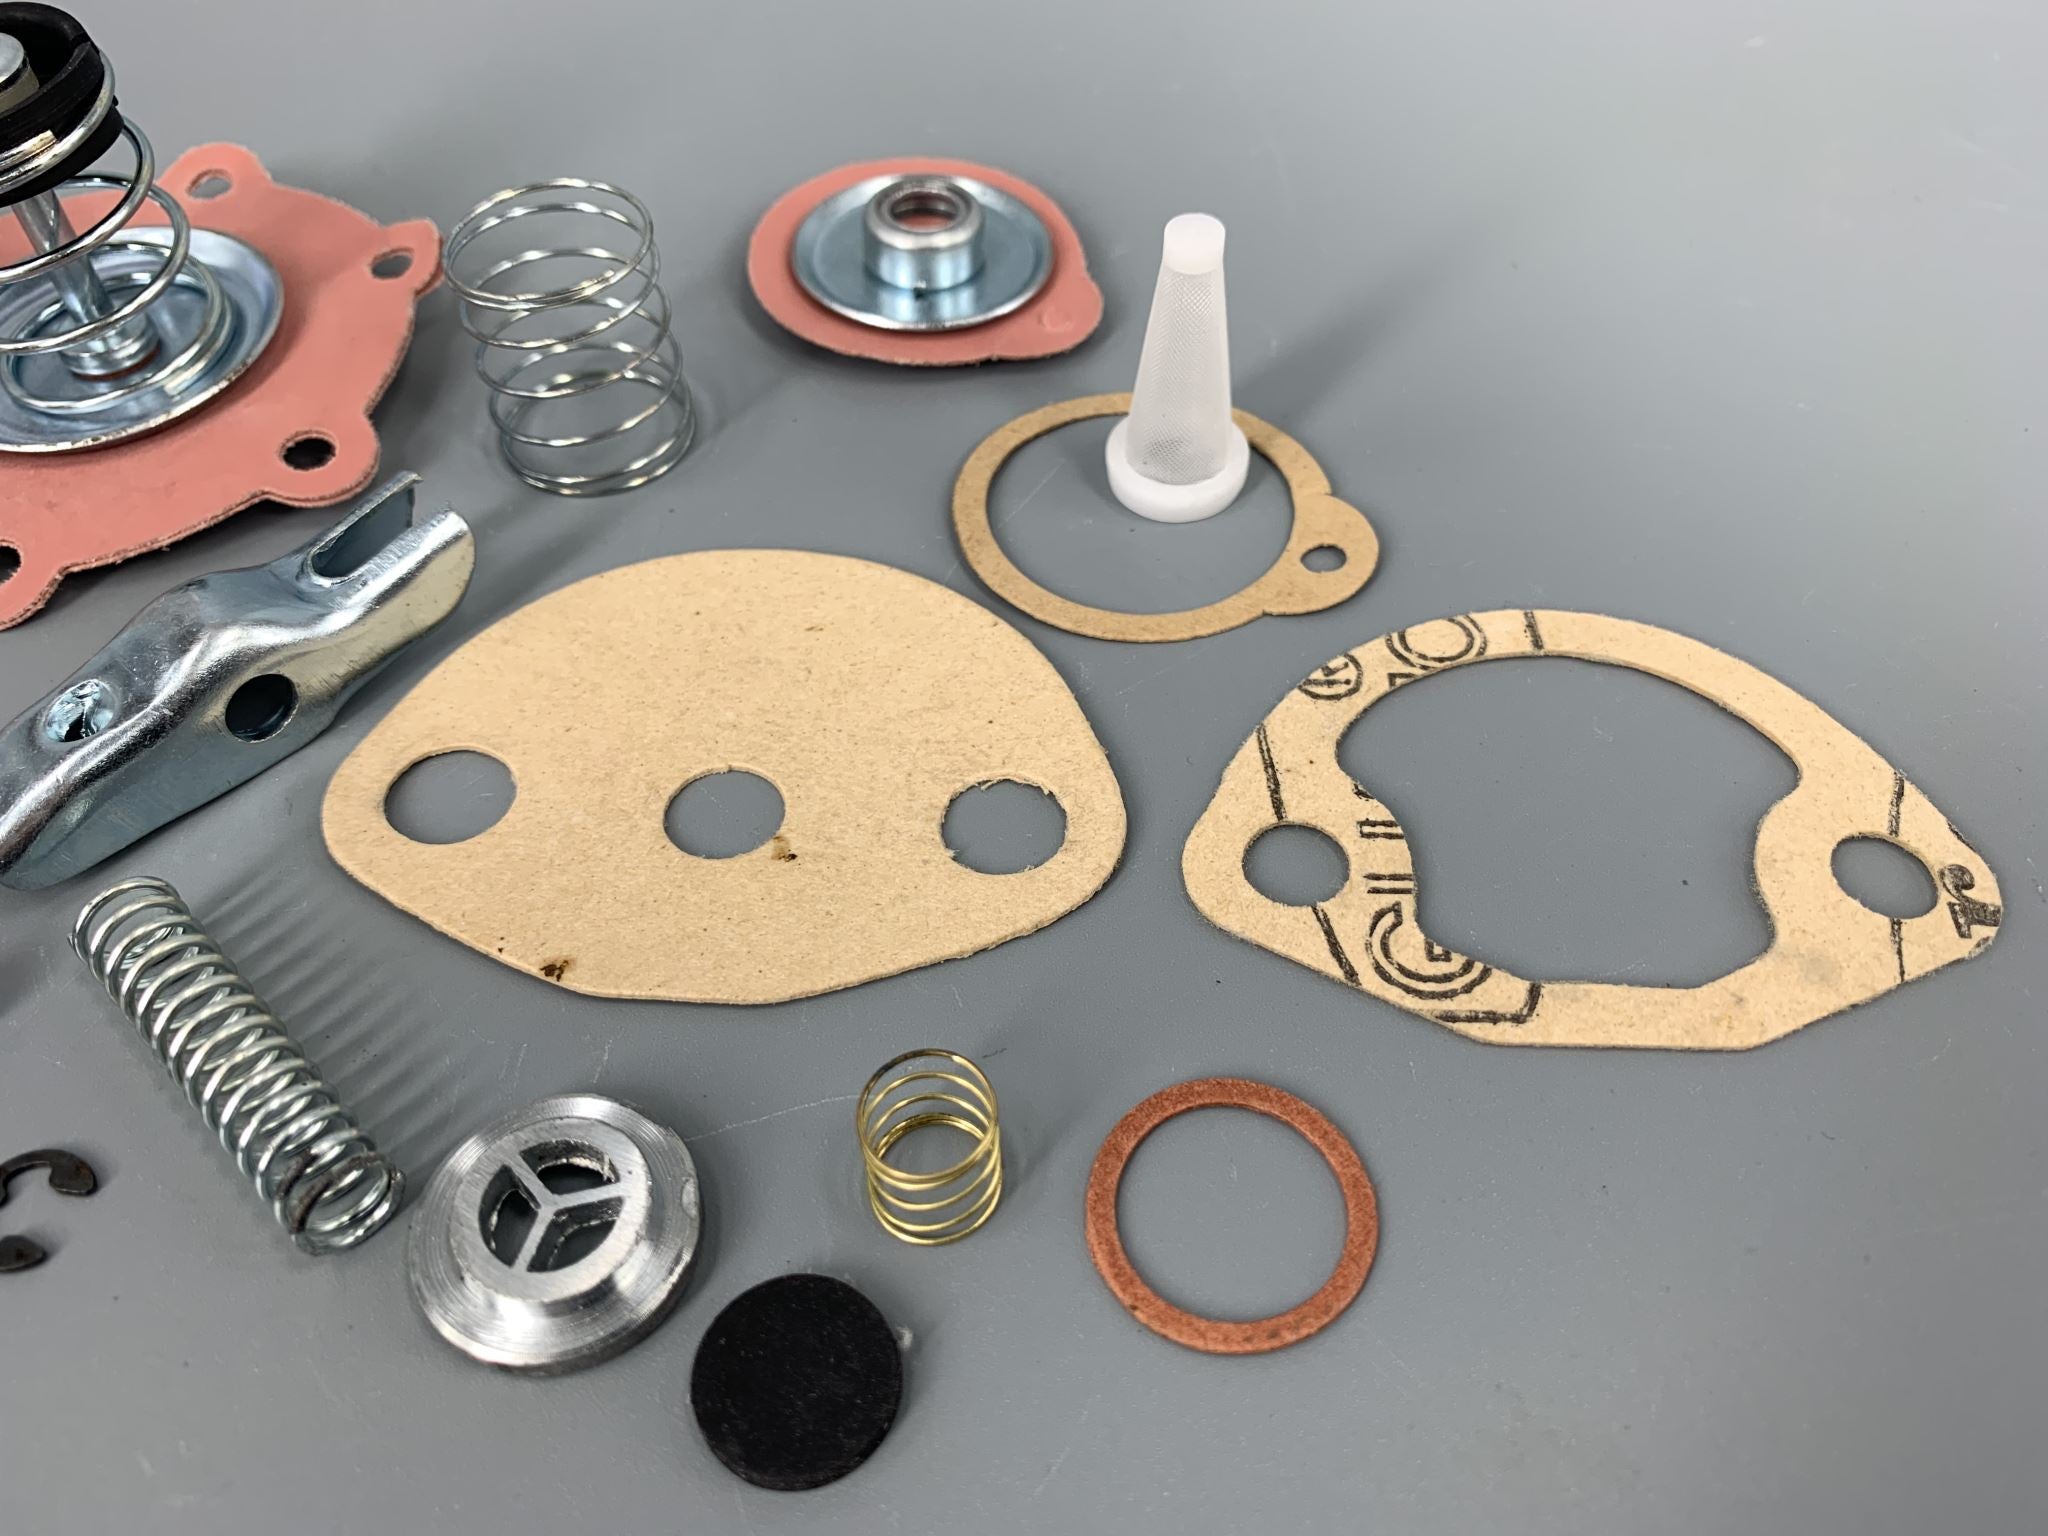 VWC-111-198-555 - 111198555 - EXCELLENT REPRODUCTION FROM EUROPE - FUEL PUMP  REBUILD KIT 13-1600CC - FOR